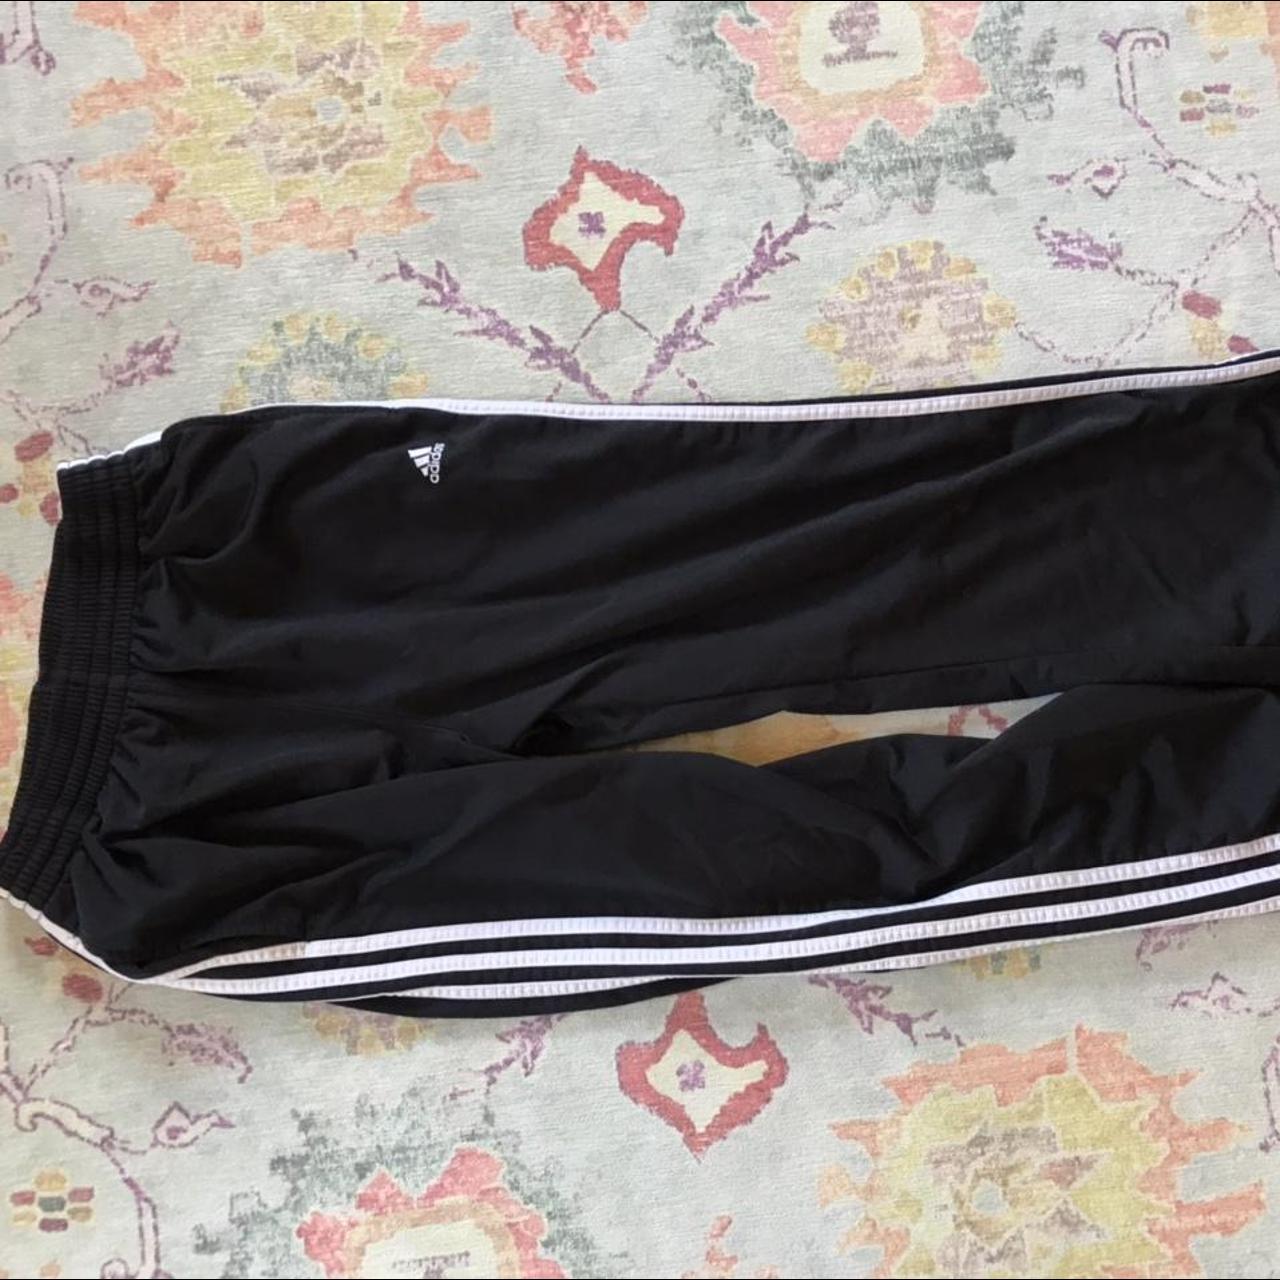 Adidas black and white track pants loose flare at... - Depop